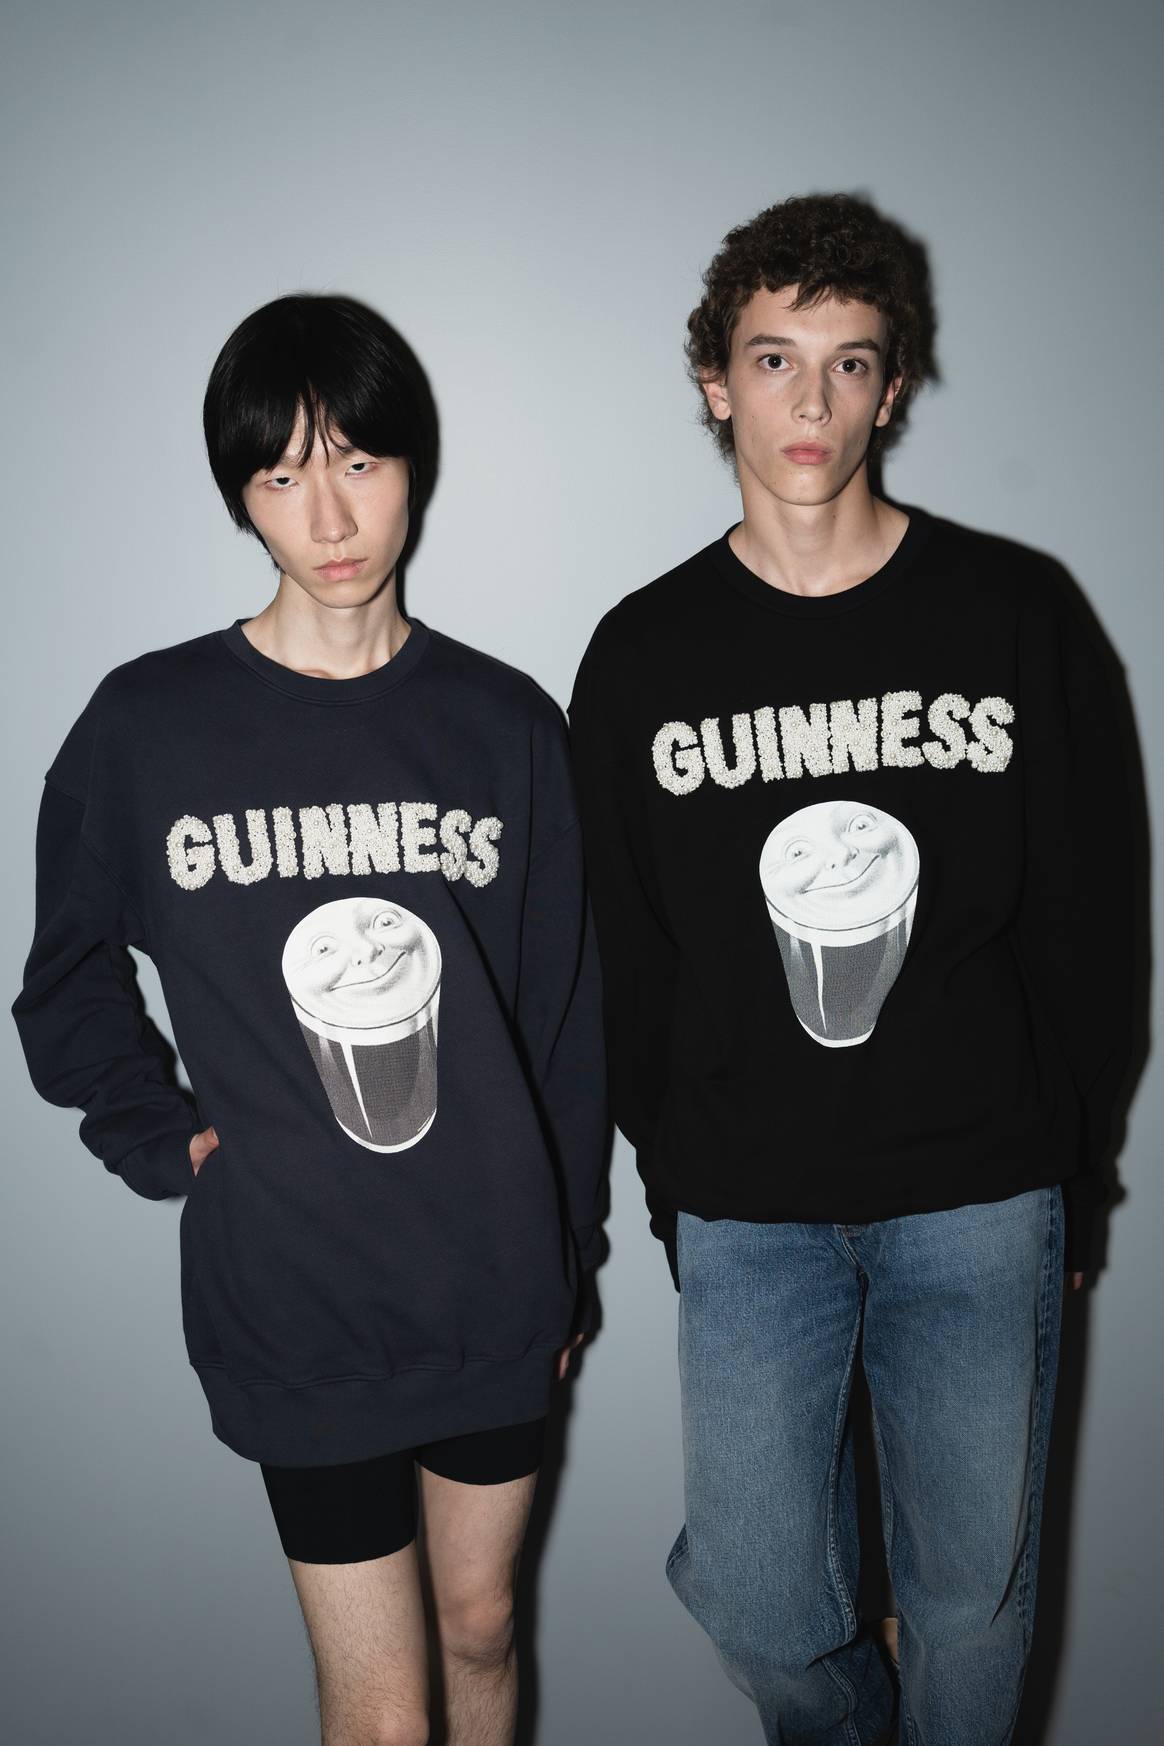 Guinness x JW Anderson ready-to-wear capsule collection